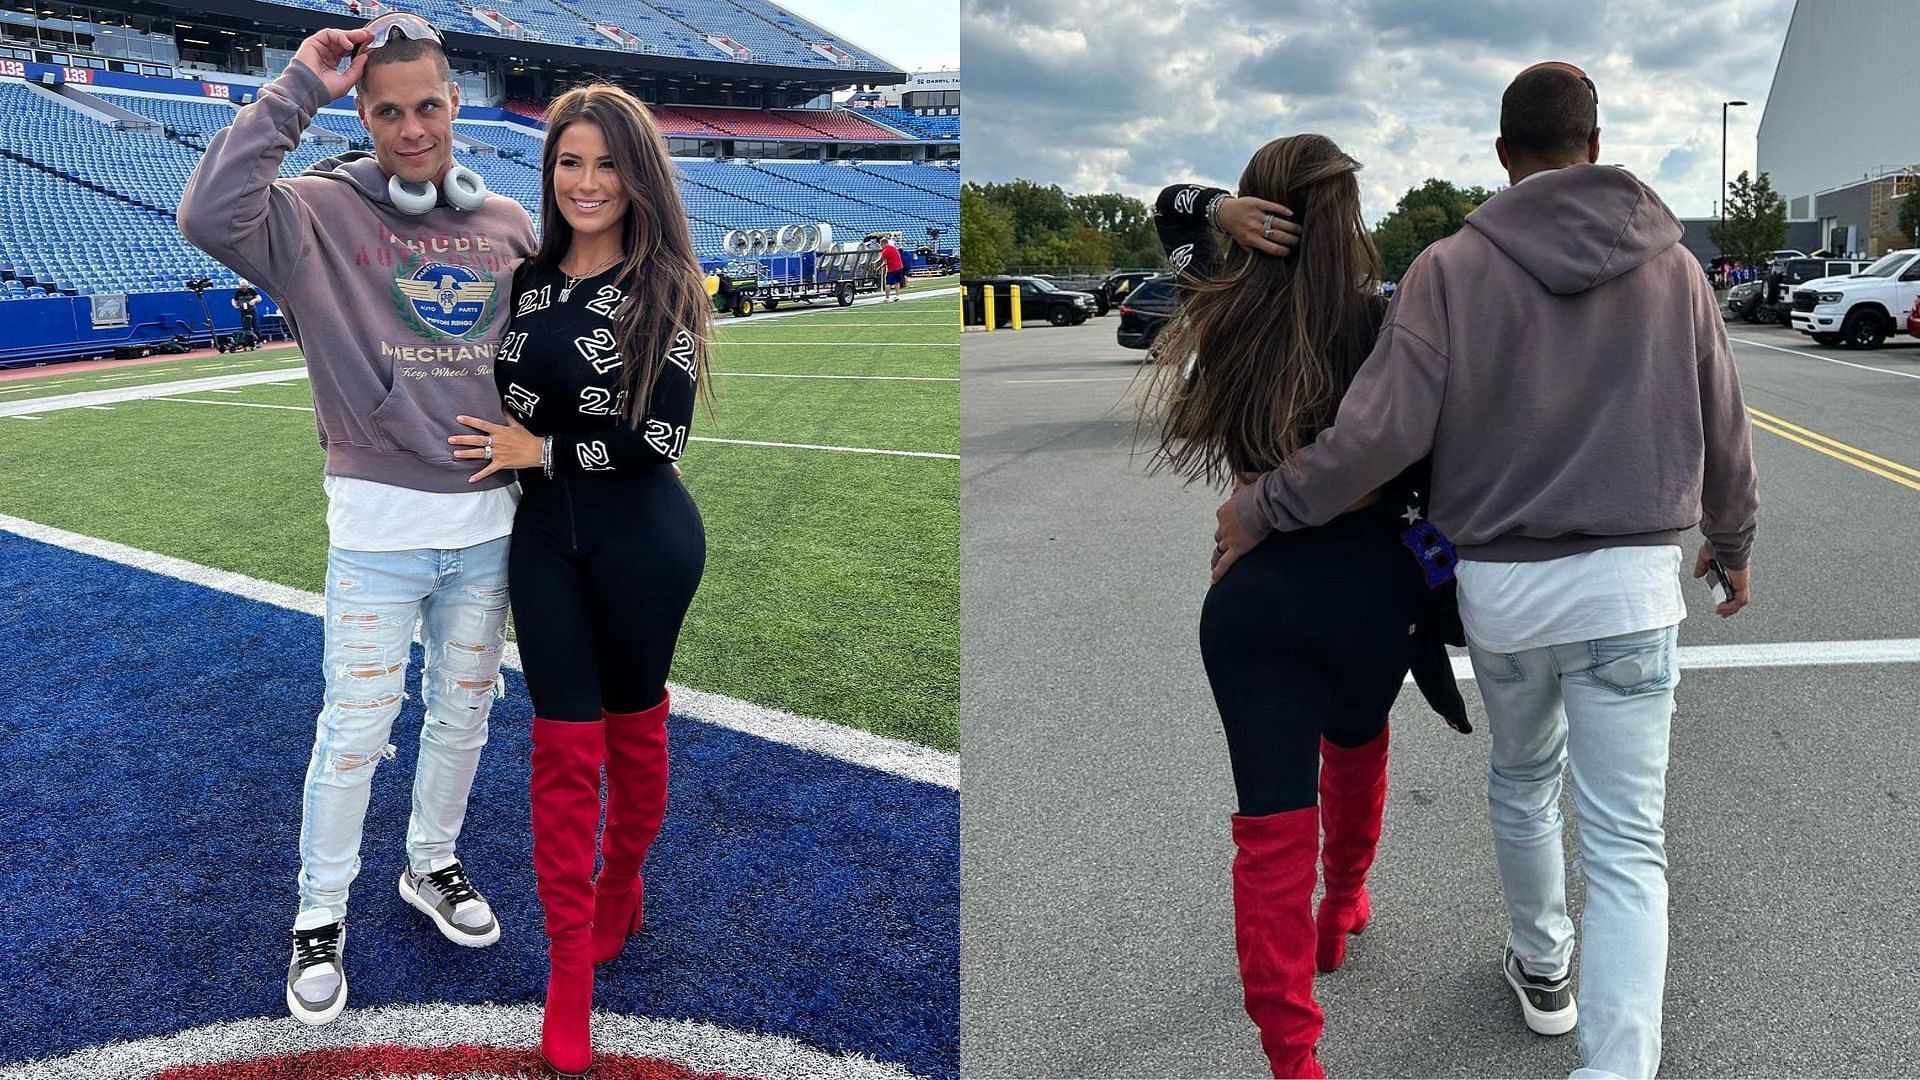 Rachel Bush uploads glamorous pictures from the Bills game.